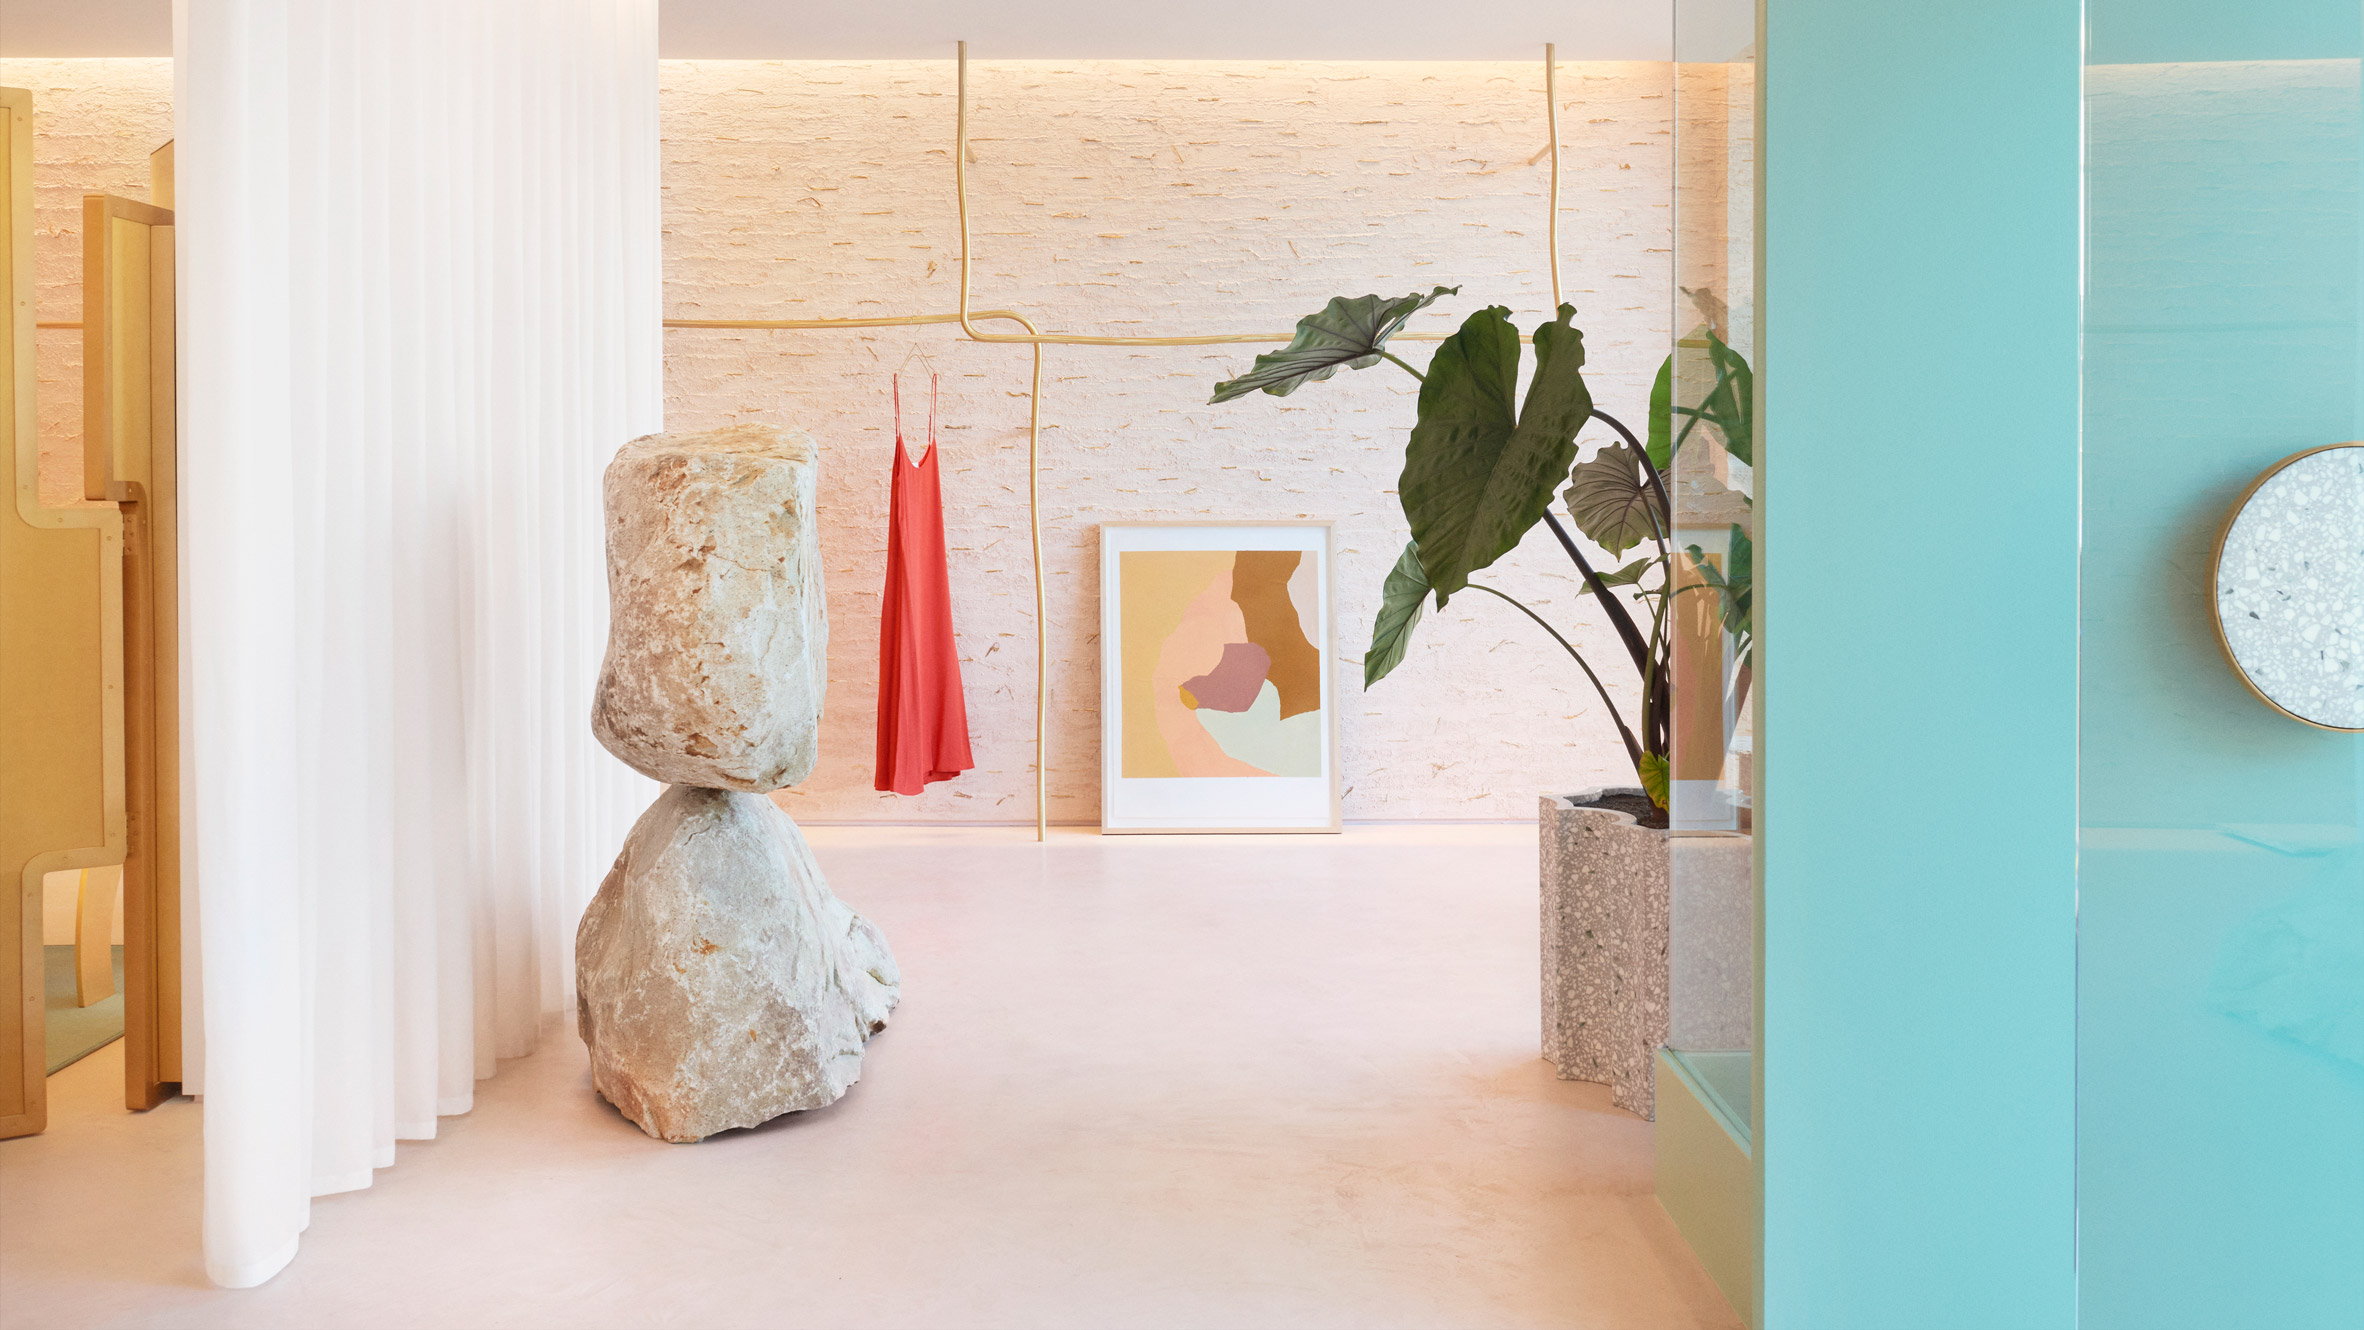 Forte Forte's first US store features golden changing rooms and balancing  stones